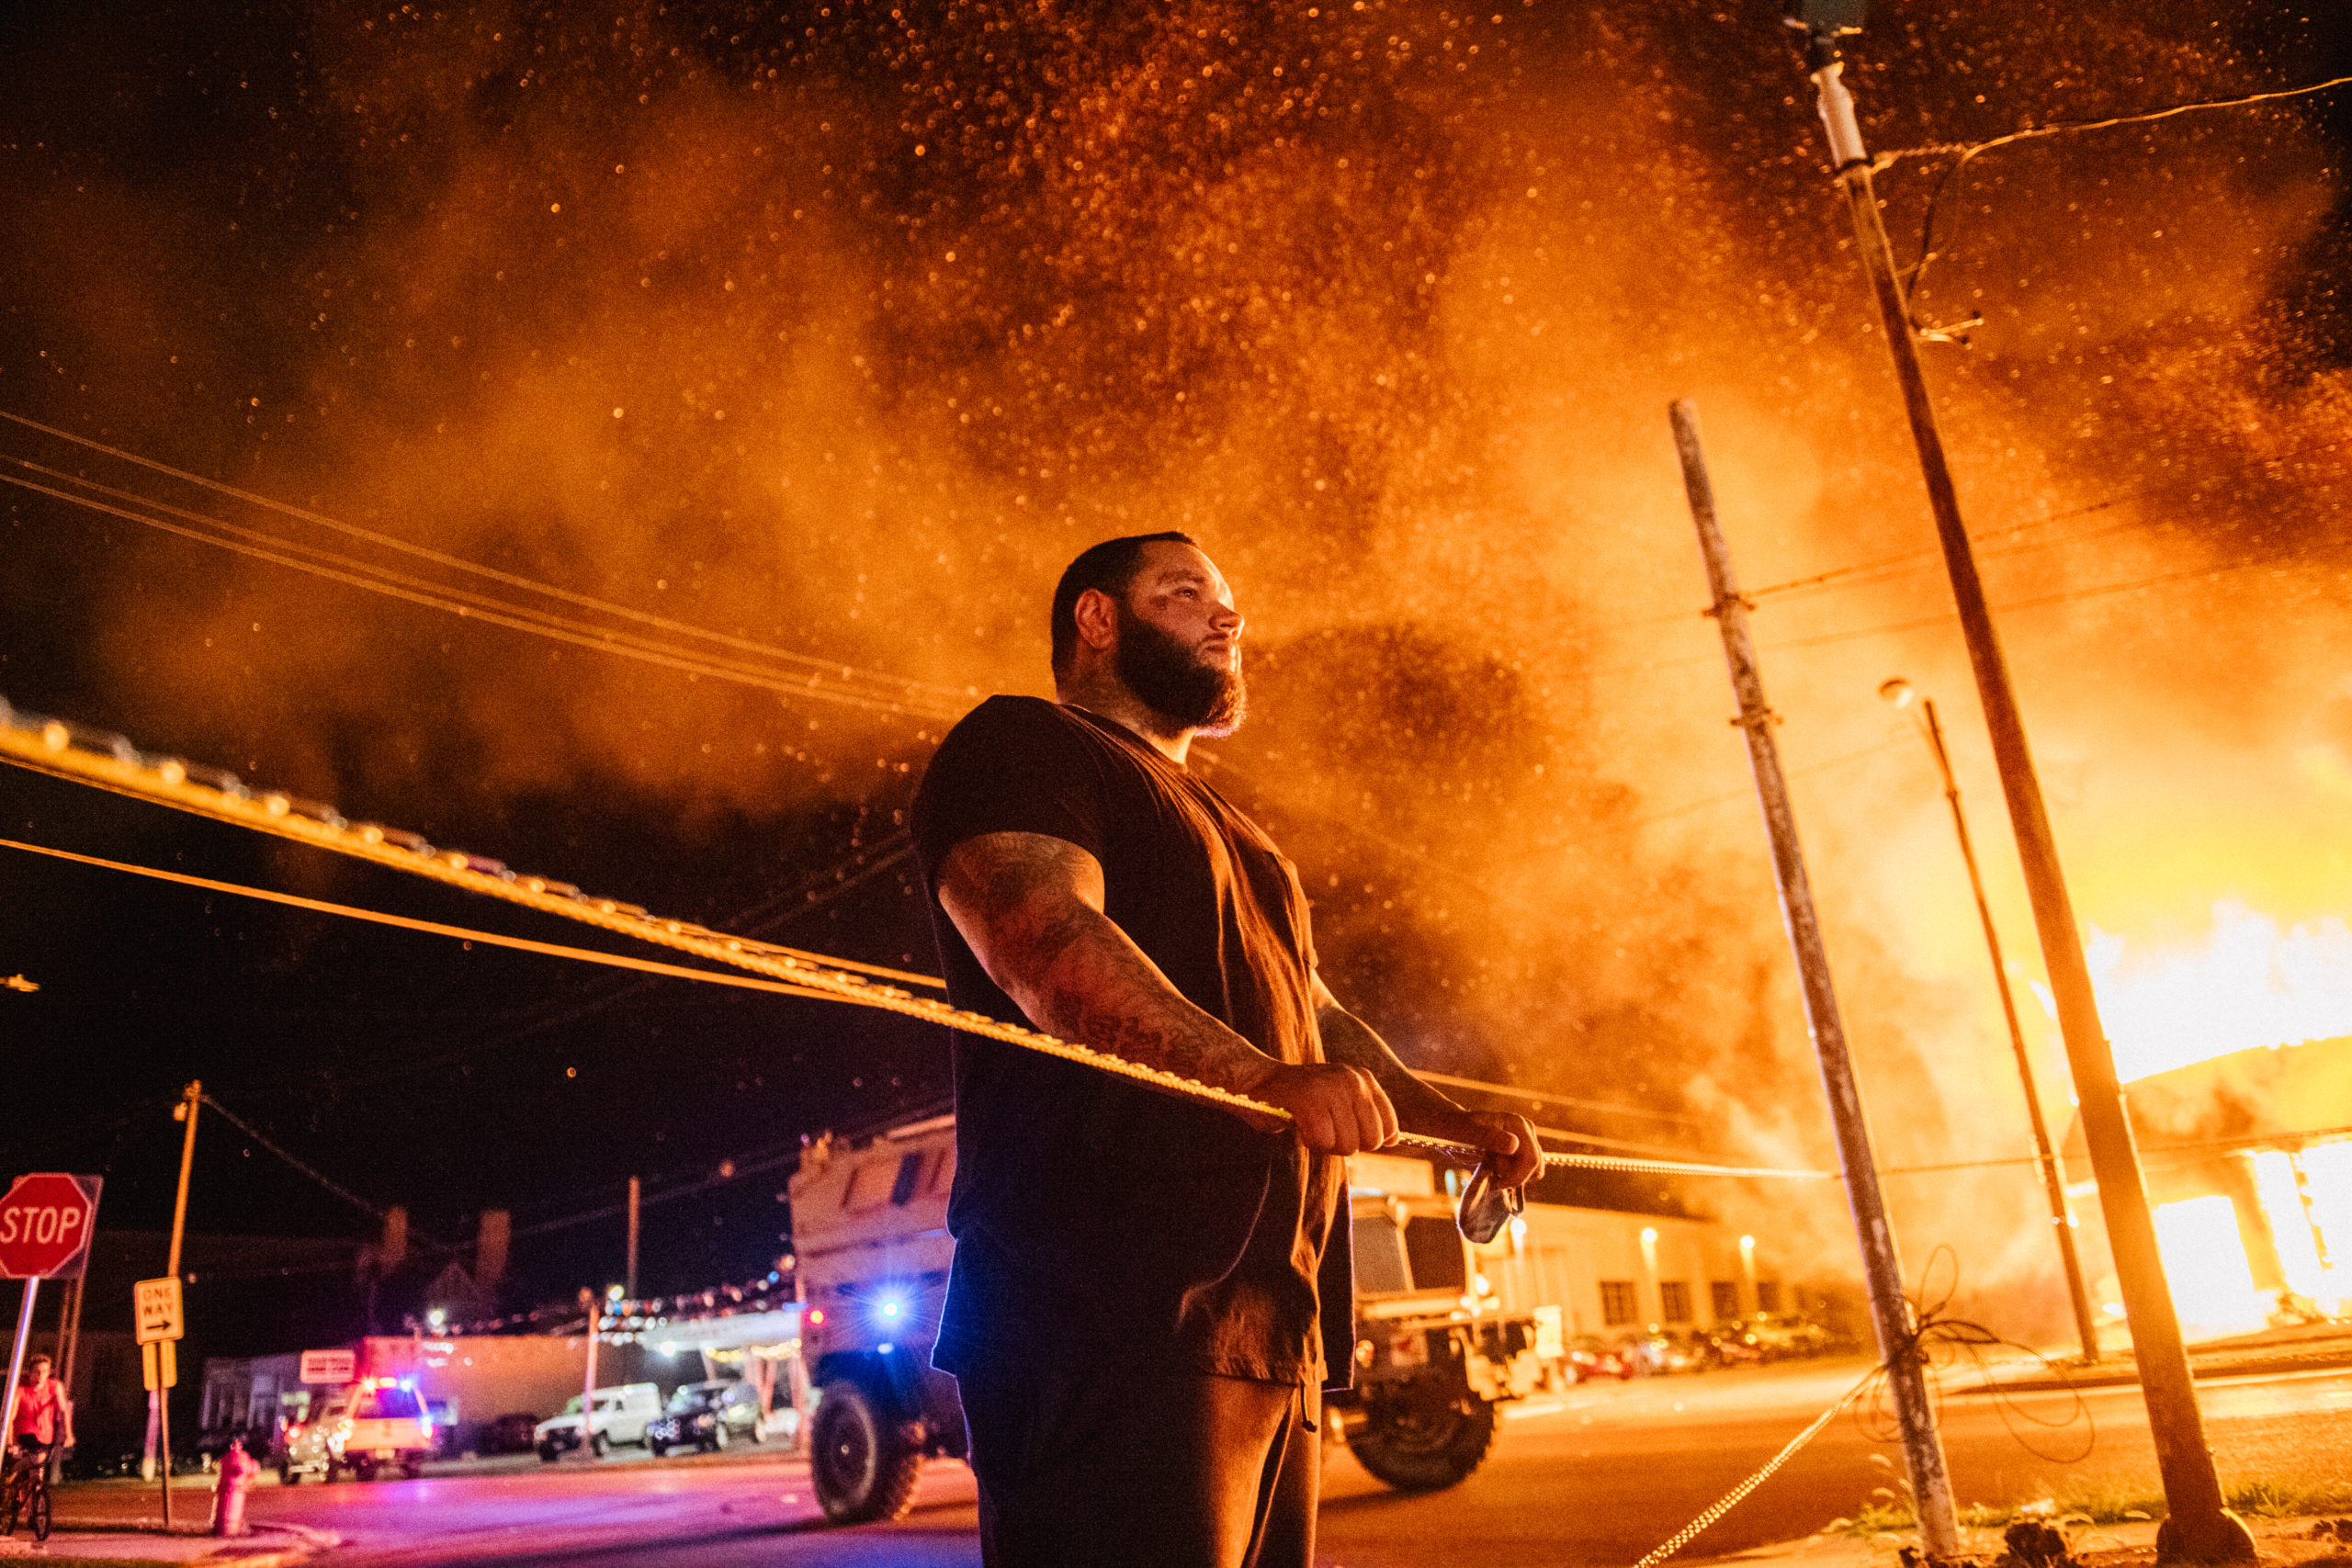 KENOSHA, WI - AUGUST 24: A man looks over caution tape during a second night of rioting on August 24, 2020 in Kenosha, Wisconsin. The civil unrest occurred after the shooting of Jacob Blake, 29, on August 23. Blake was shot multiple times in the back by Wisconsin police officers after attempting to enter into the drivers side of a vehicle. (Photo by Brandon Bell/Getty Images)